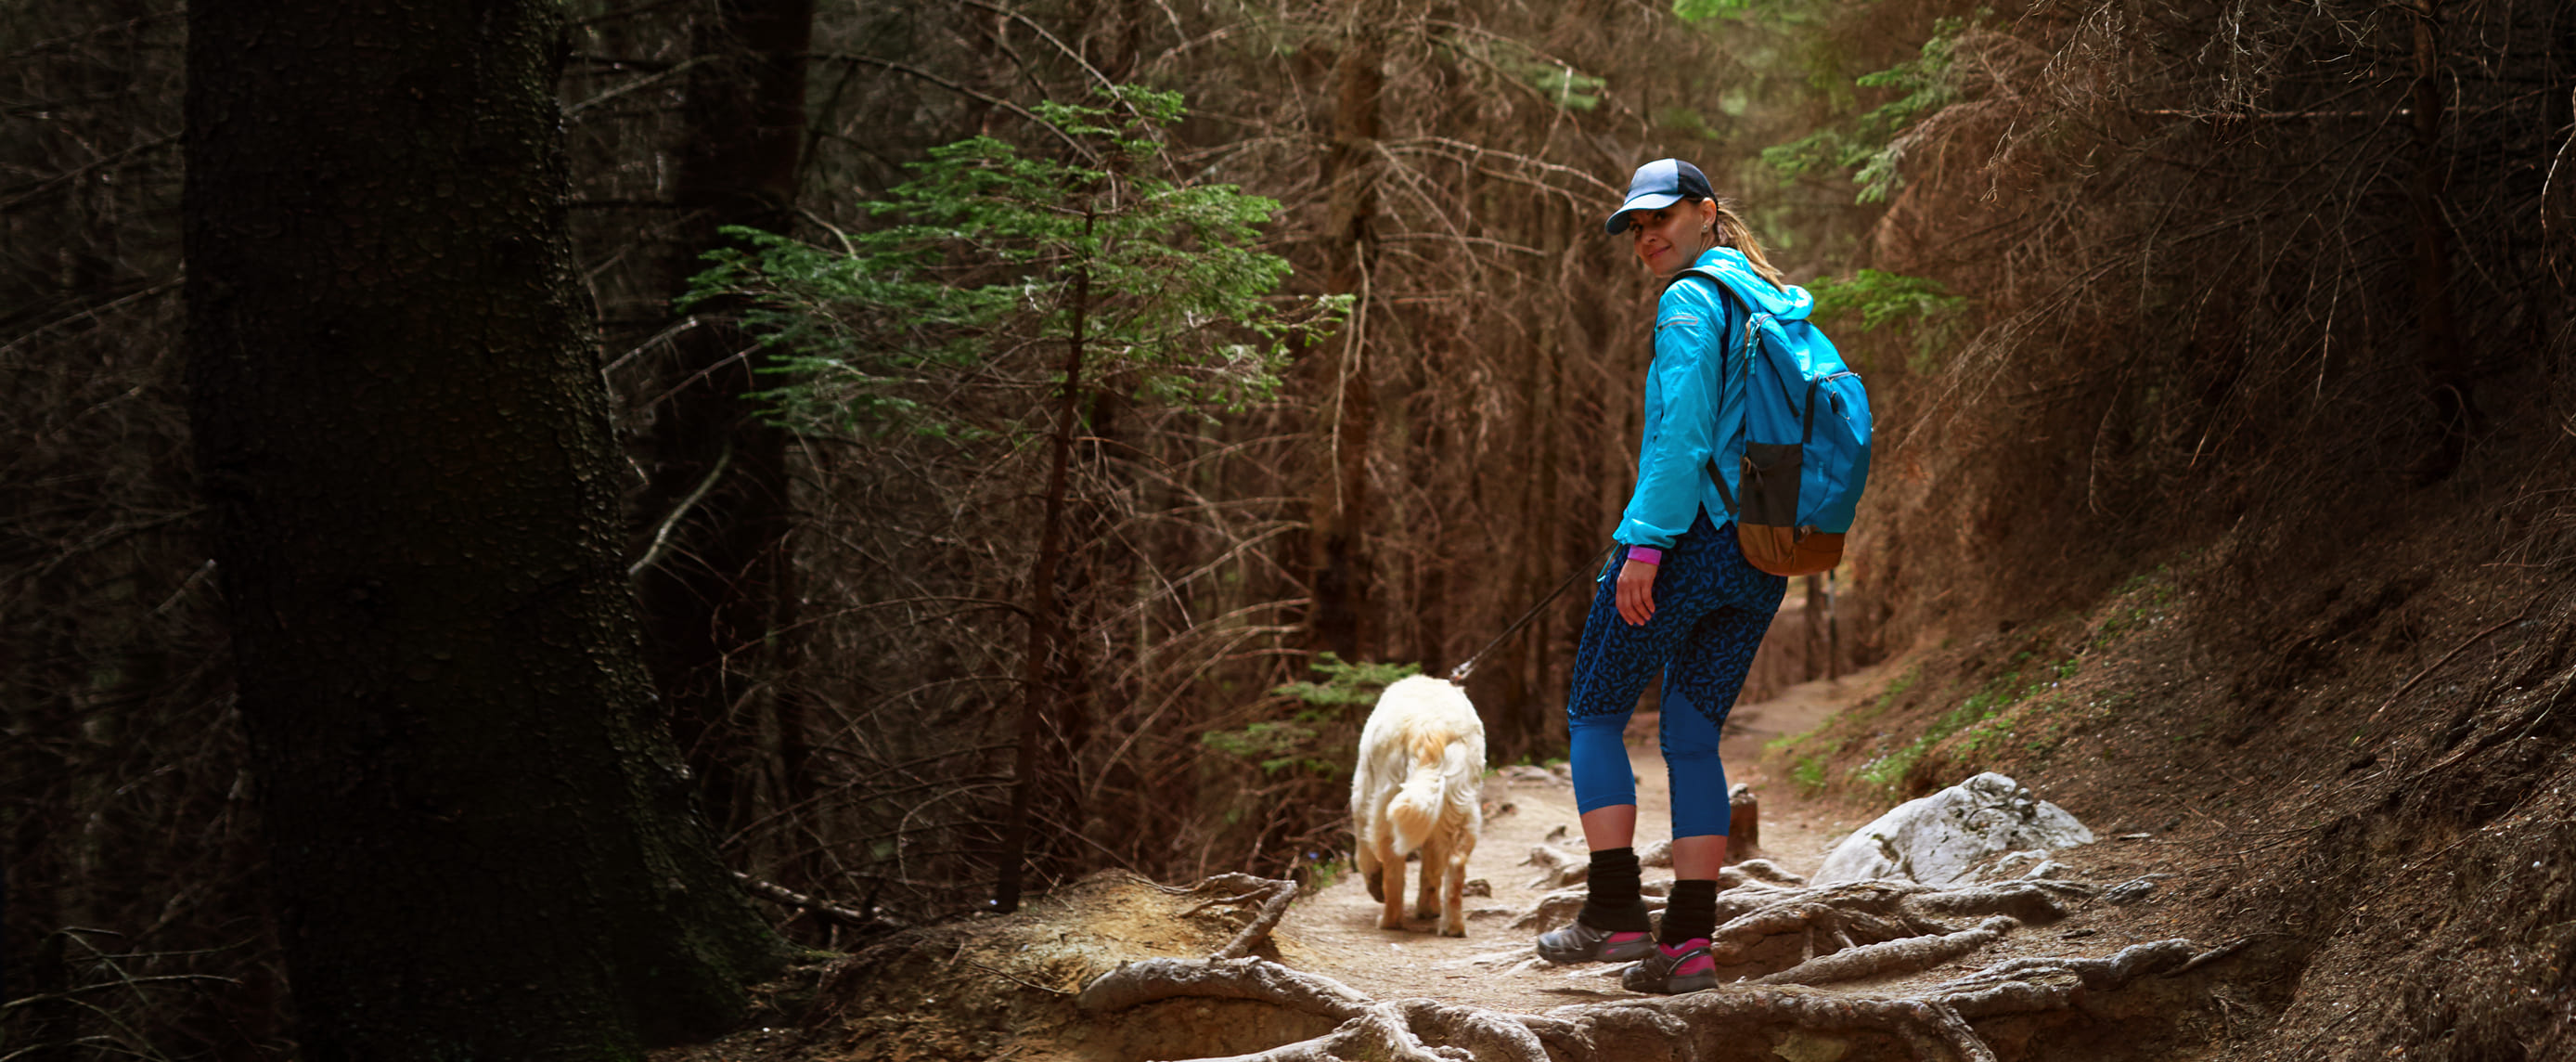 A lady hiking in the woods with her white dog.